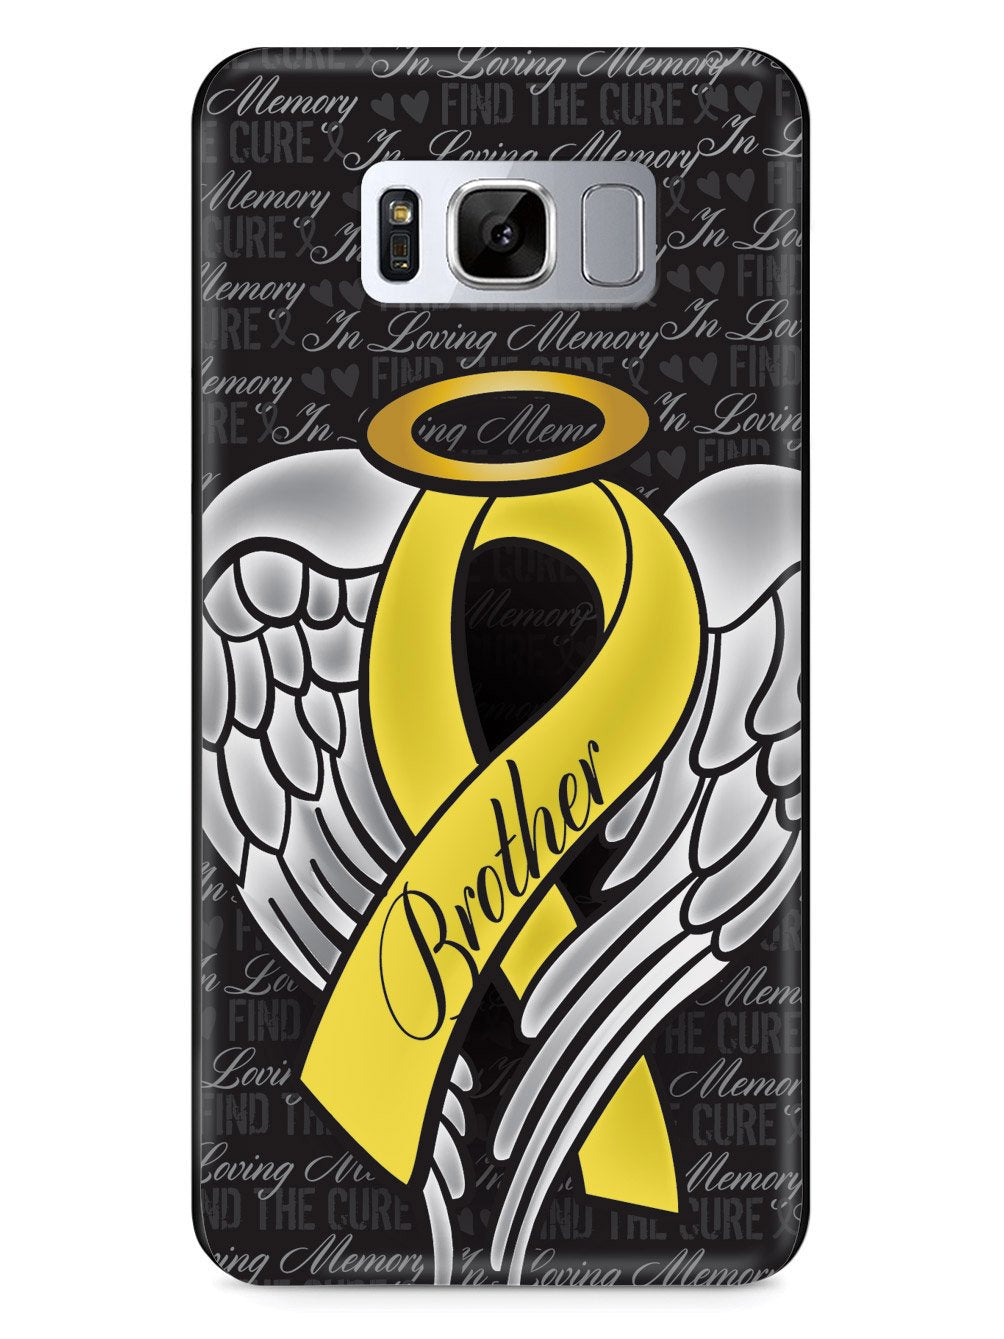 In Loving Memory of My Brother - Yellow Ribbon Case